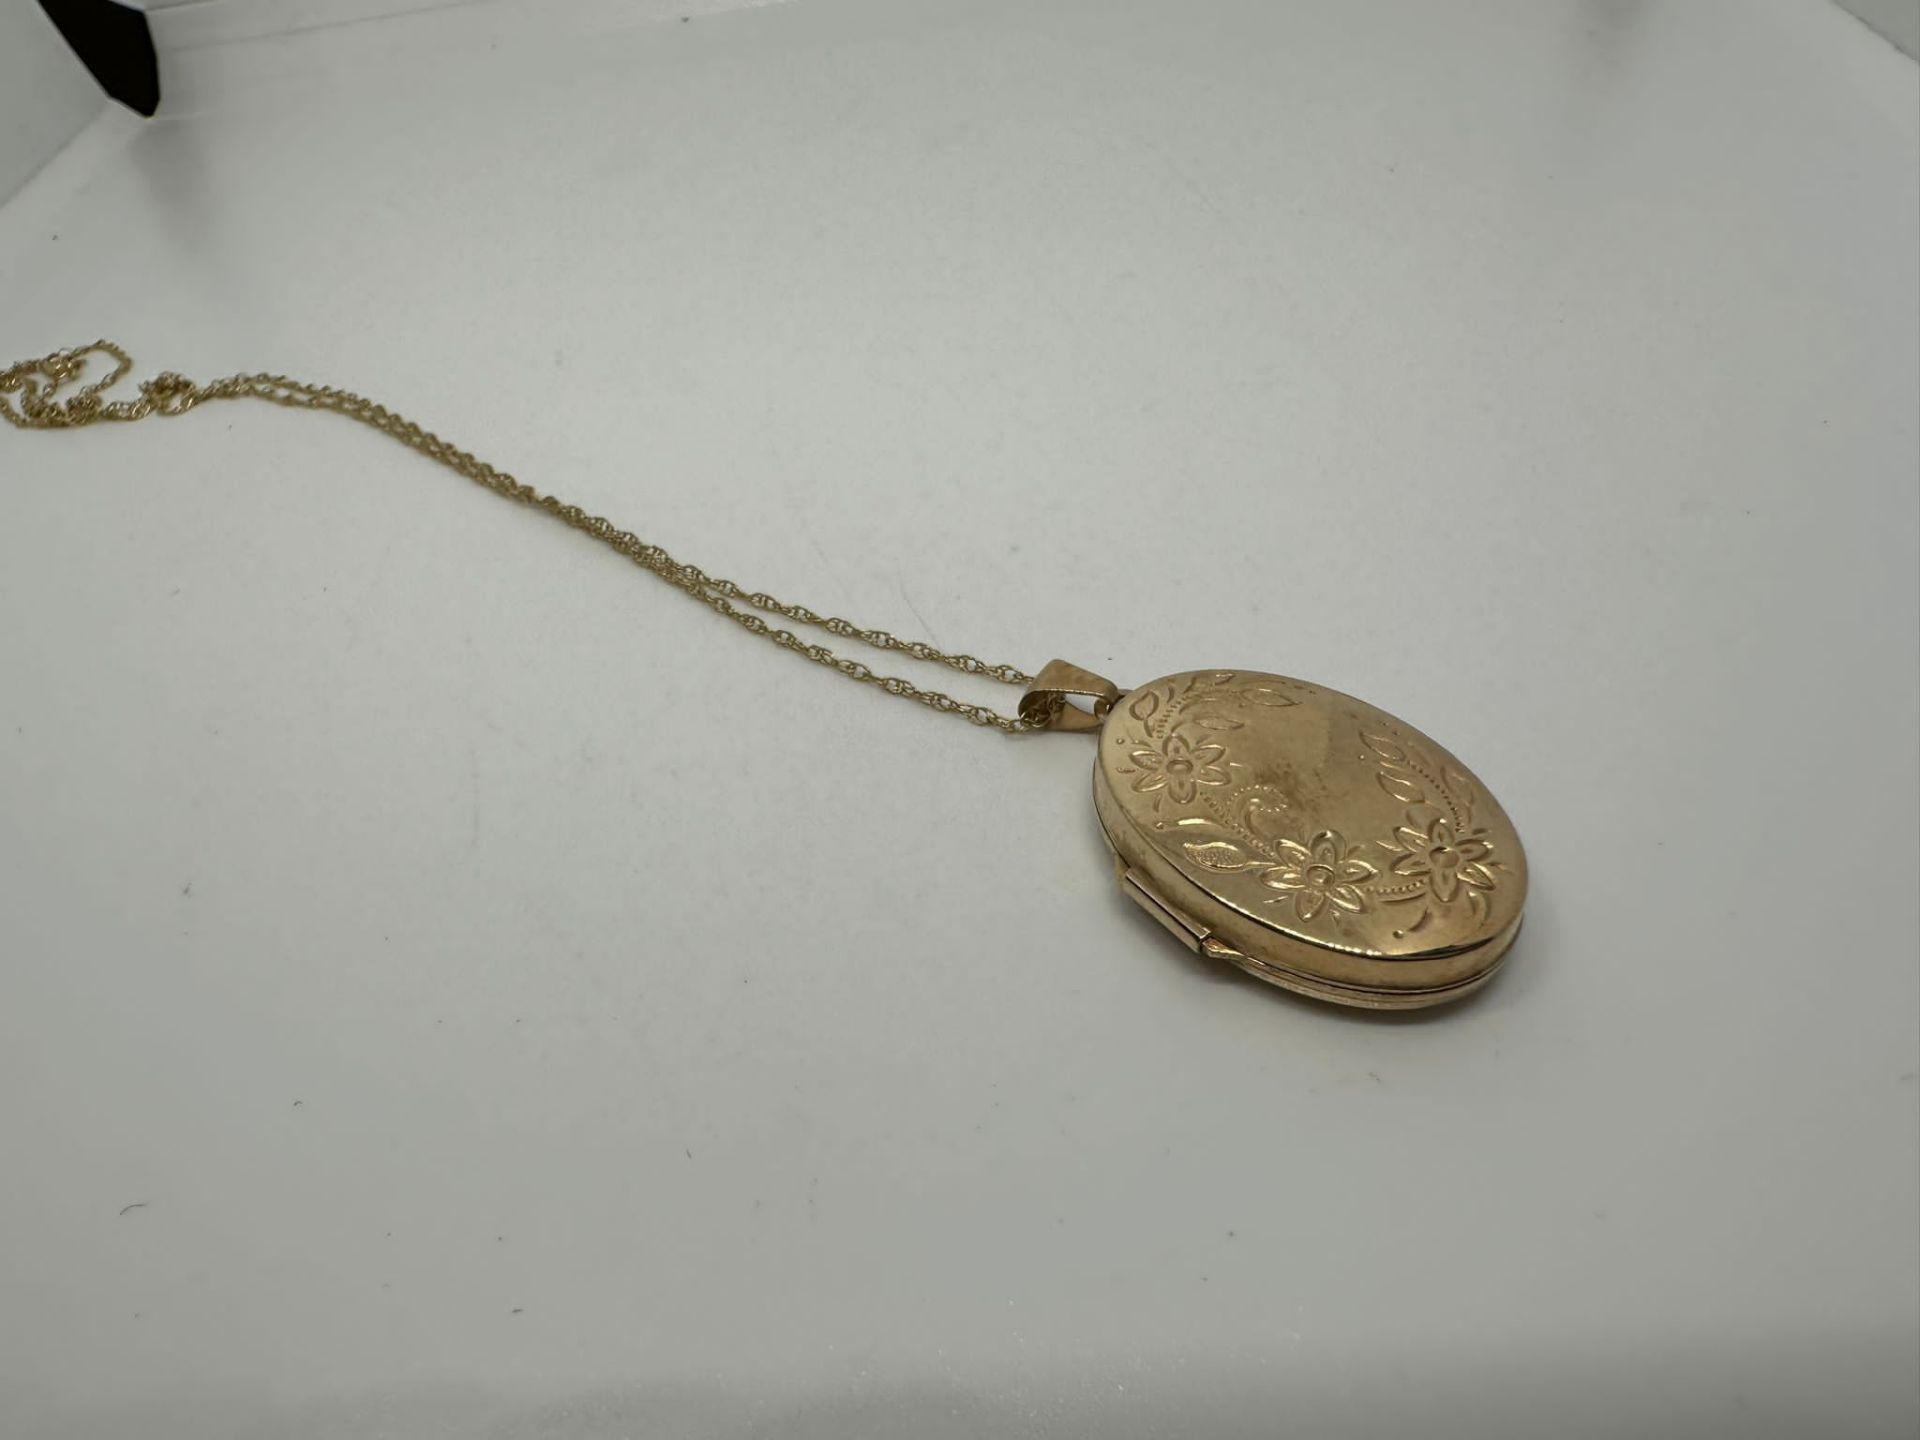 9ct gold locket and chain - Image 2 of 2